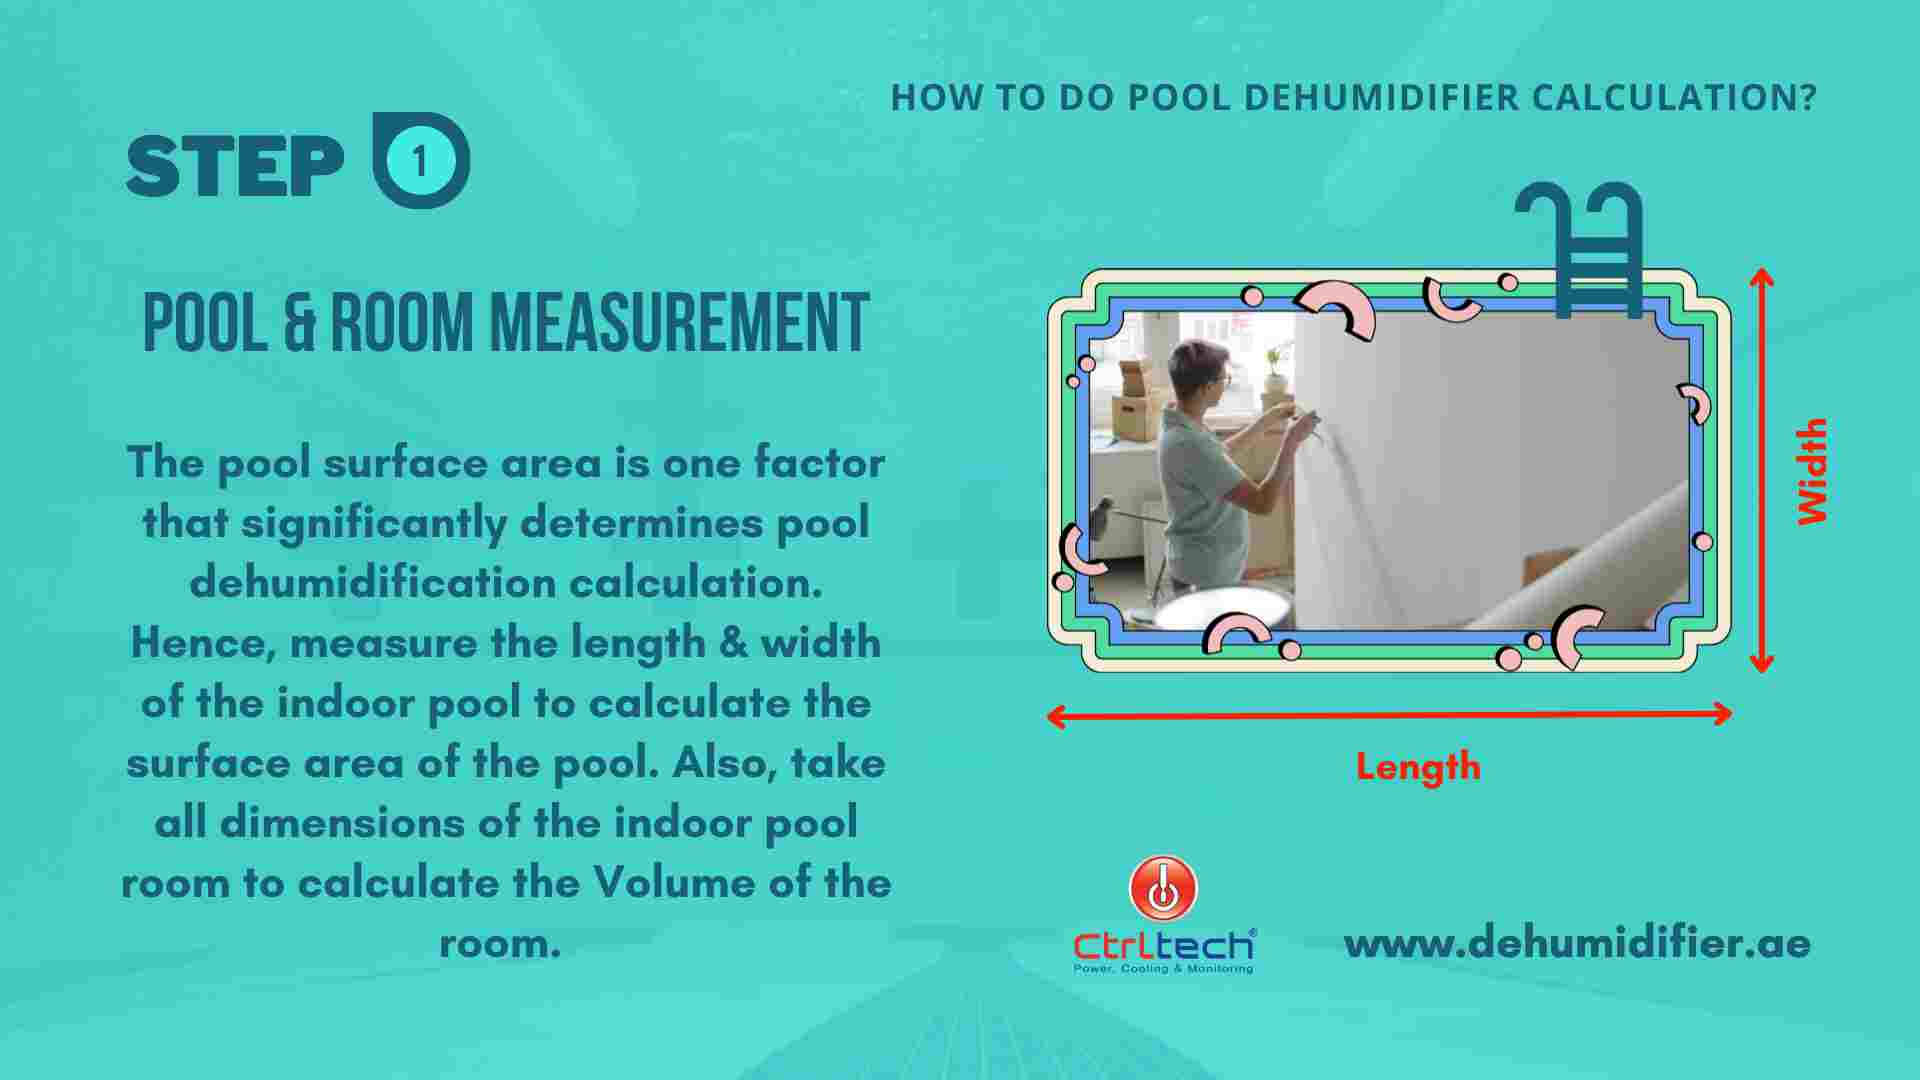 How to do swimming pool dehumidifier Calculation/Step 1 Measurement for pool dehumidification calculation